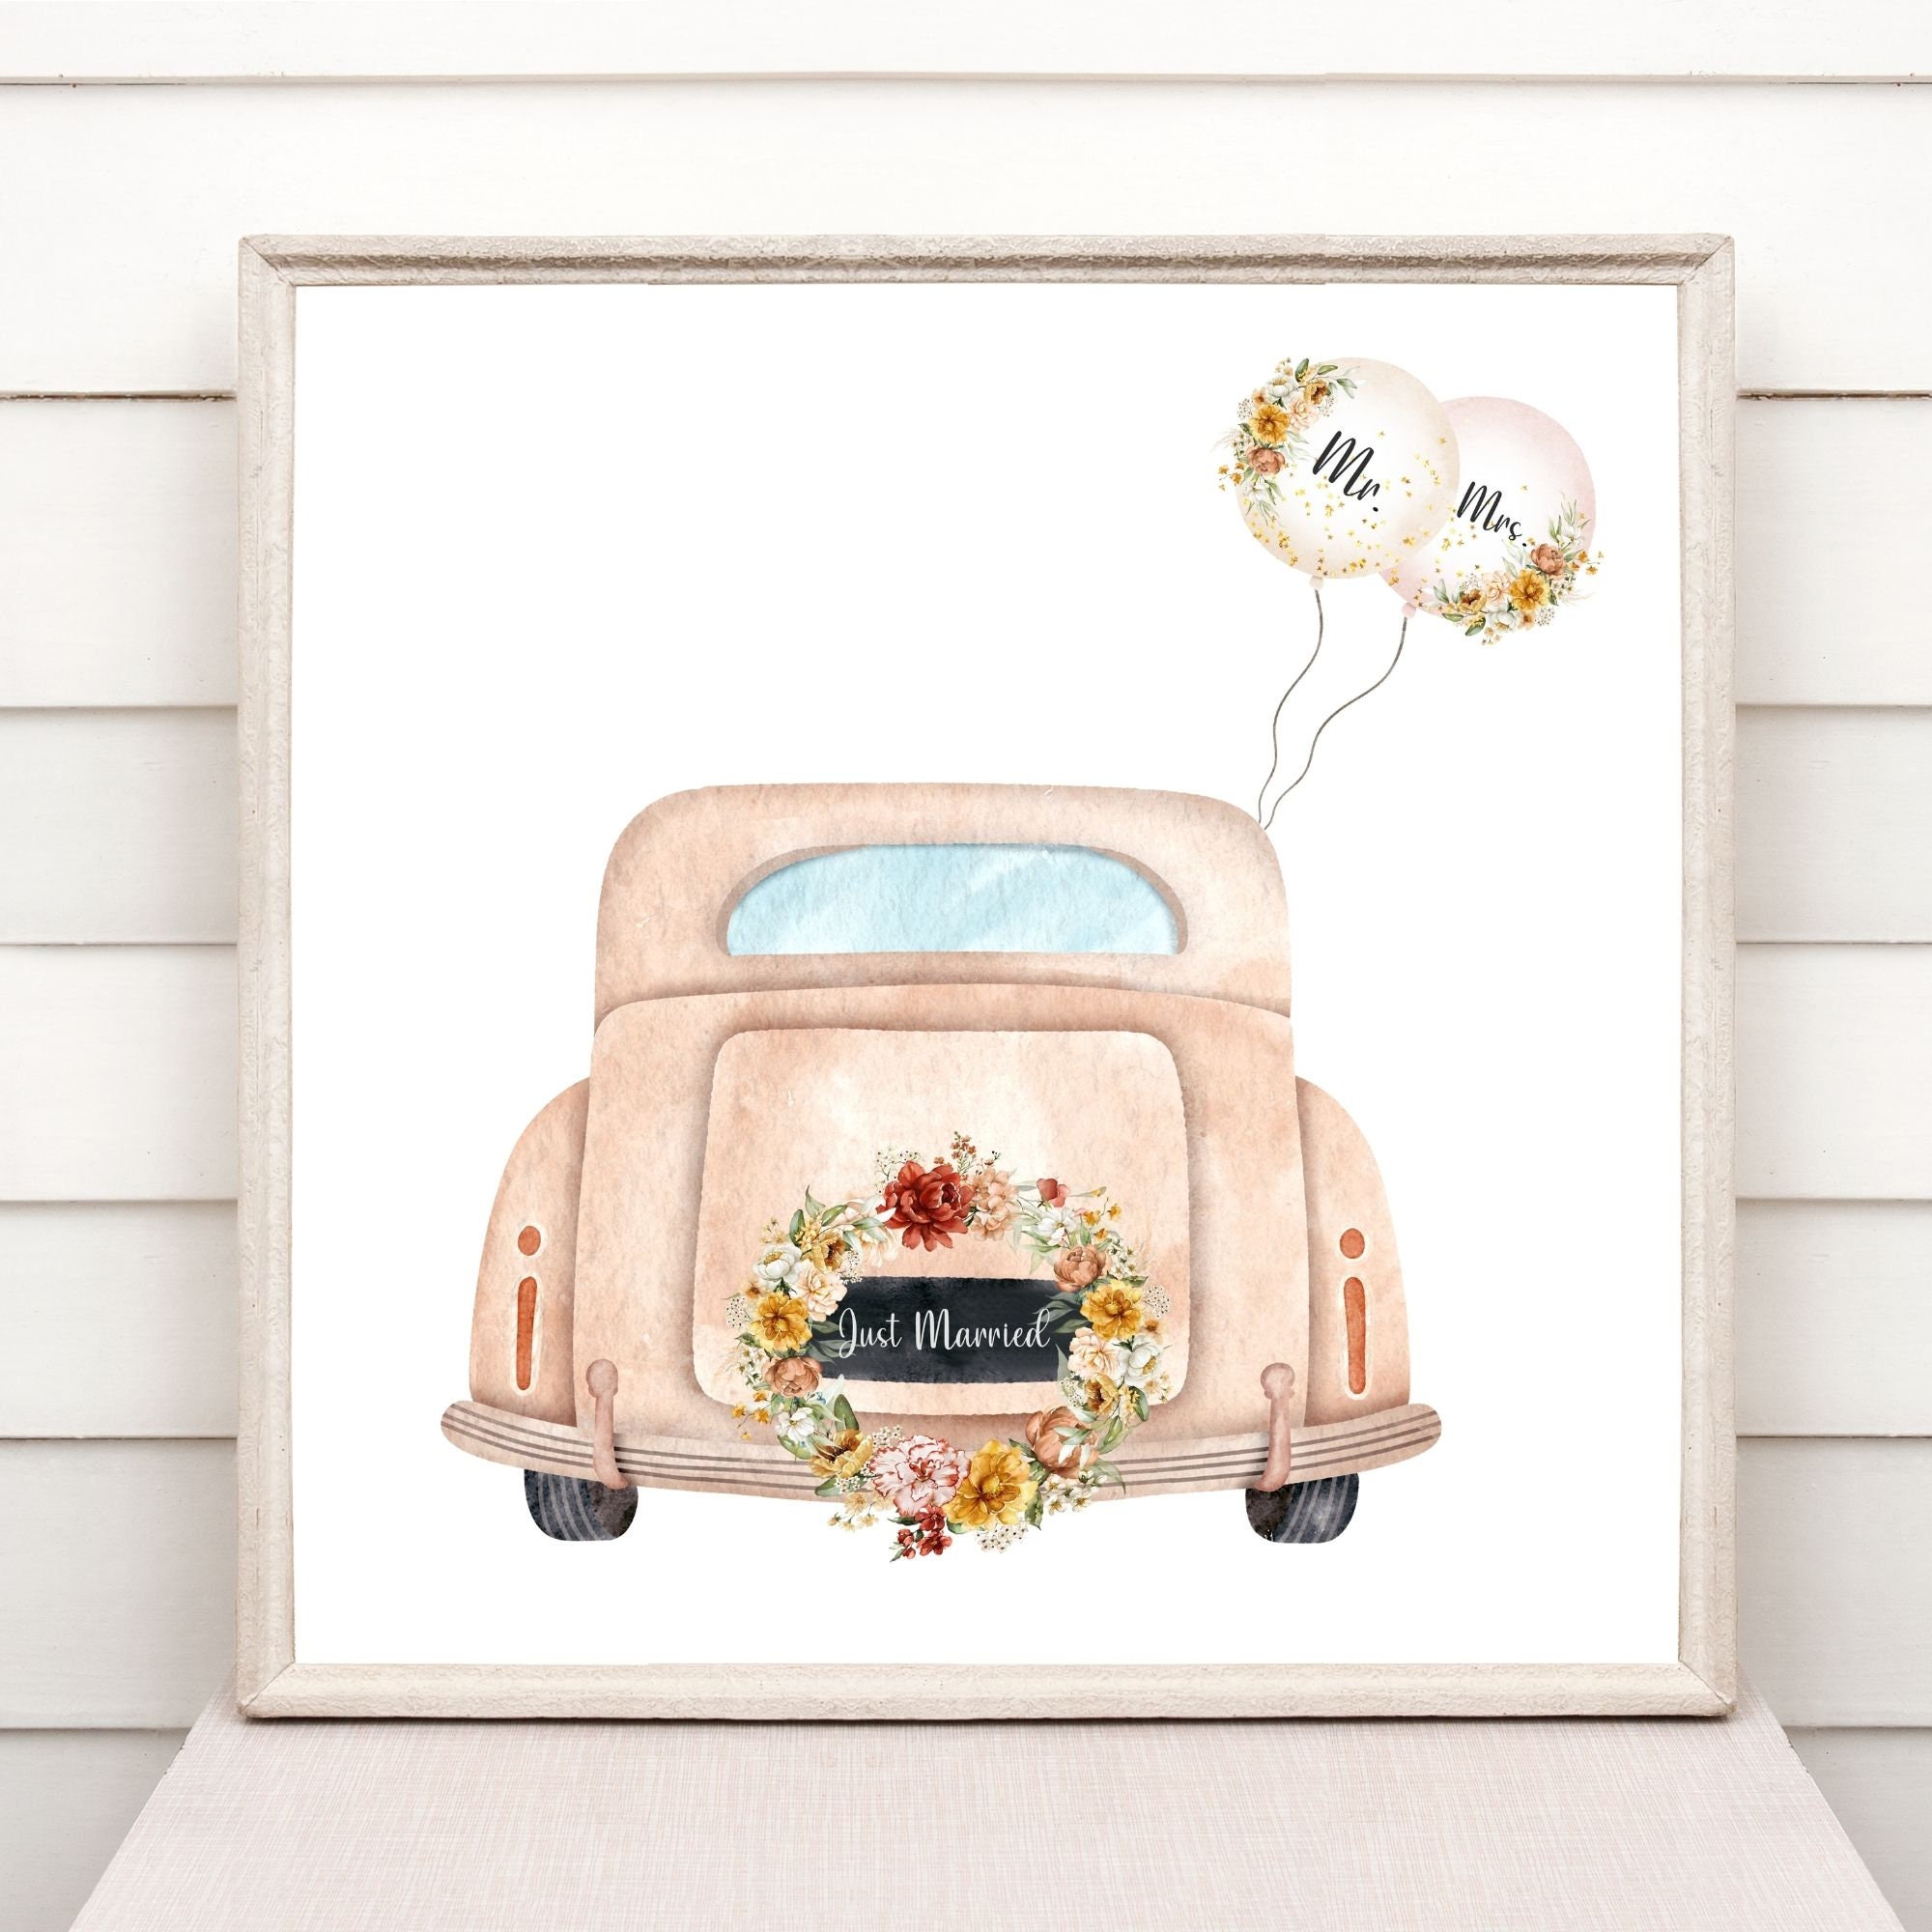 Just Married PNG, Just Married Car Prints, Mr & Mrs Watercolour Clipart, Wedding  Sublimation Designs, Congratulations Card Design, Download 